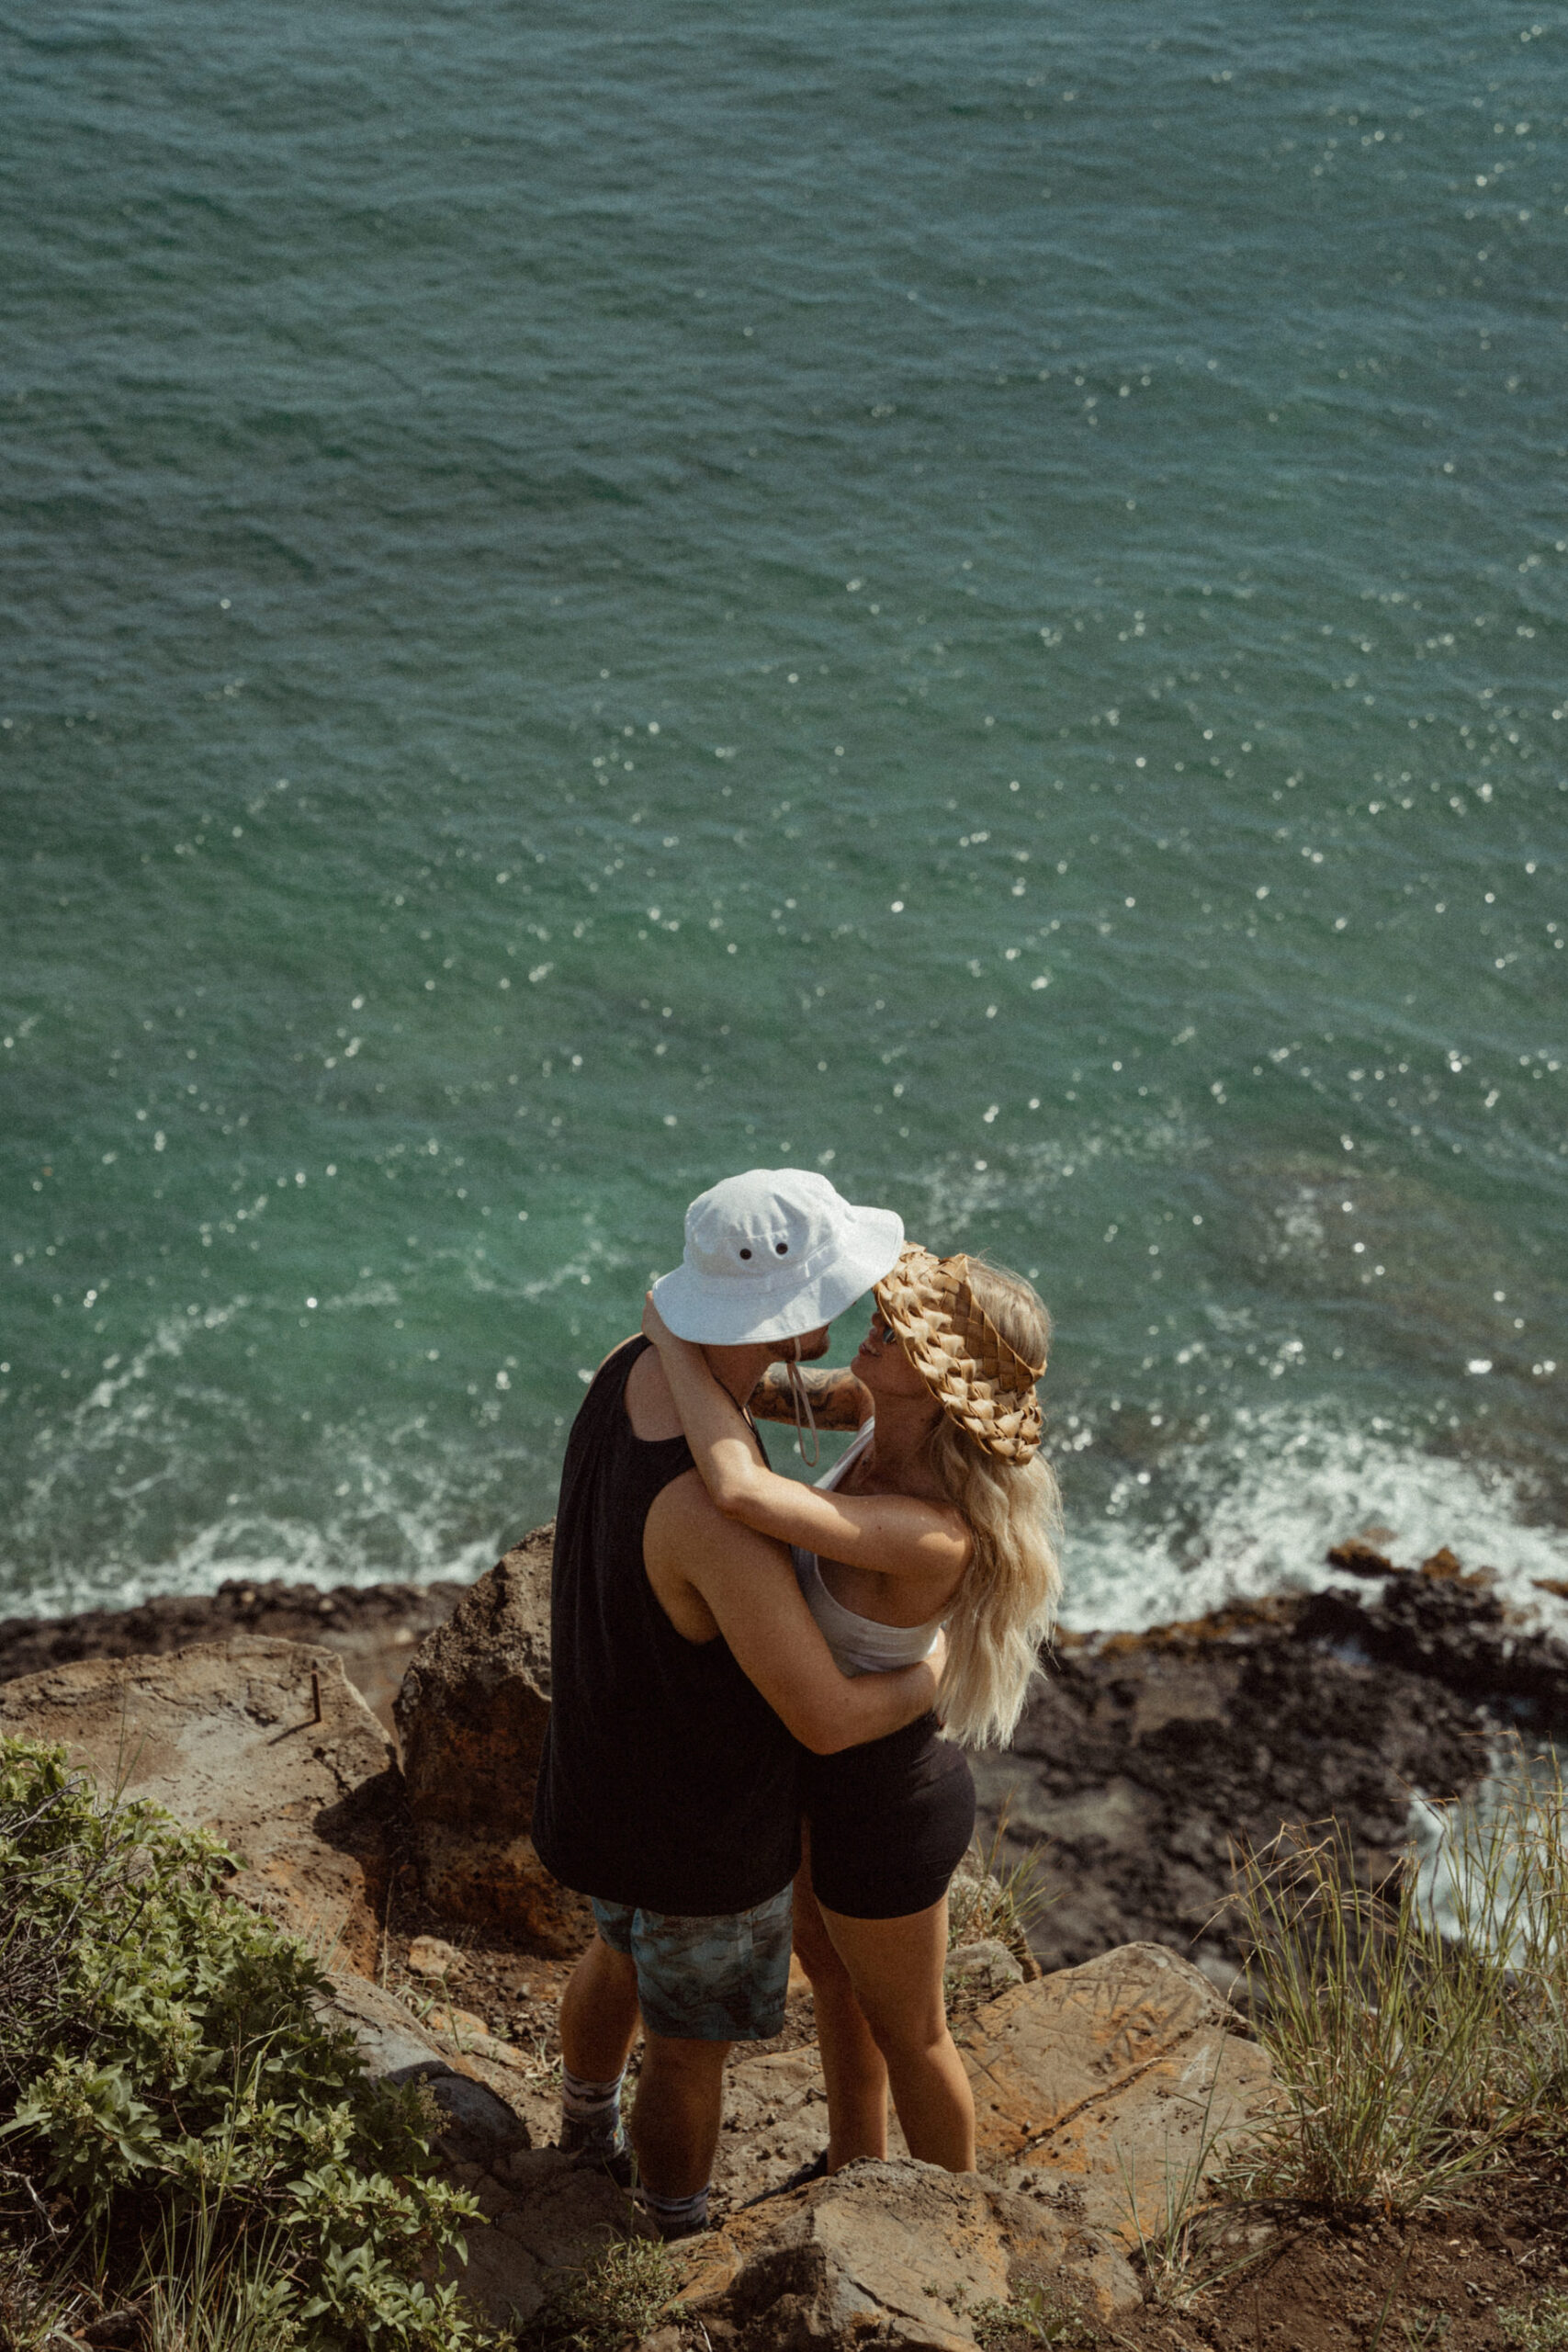 A young couple shares an embrace with the ocean in the background.